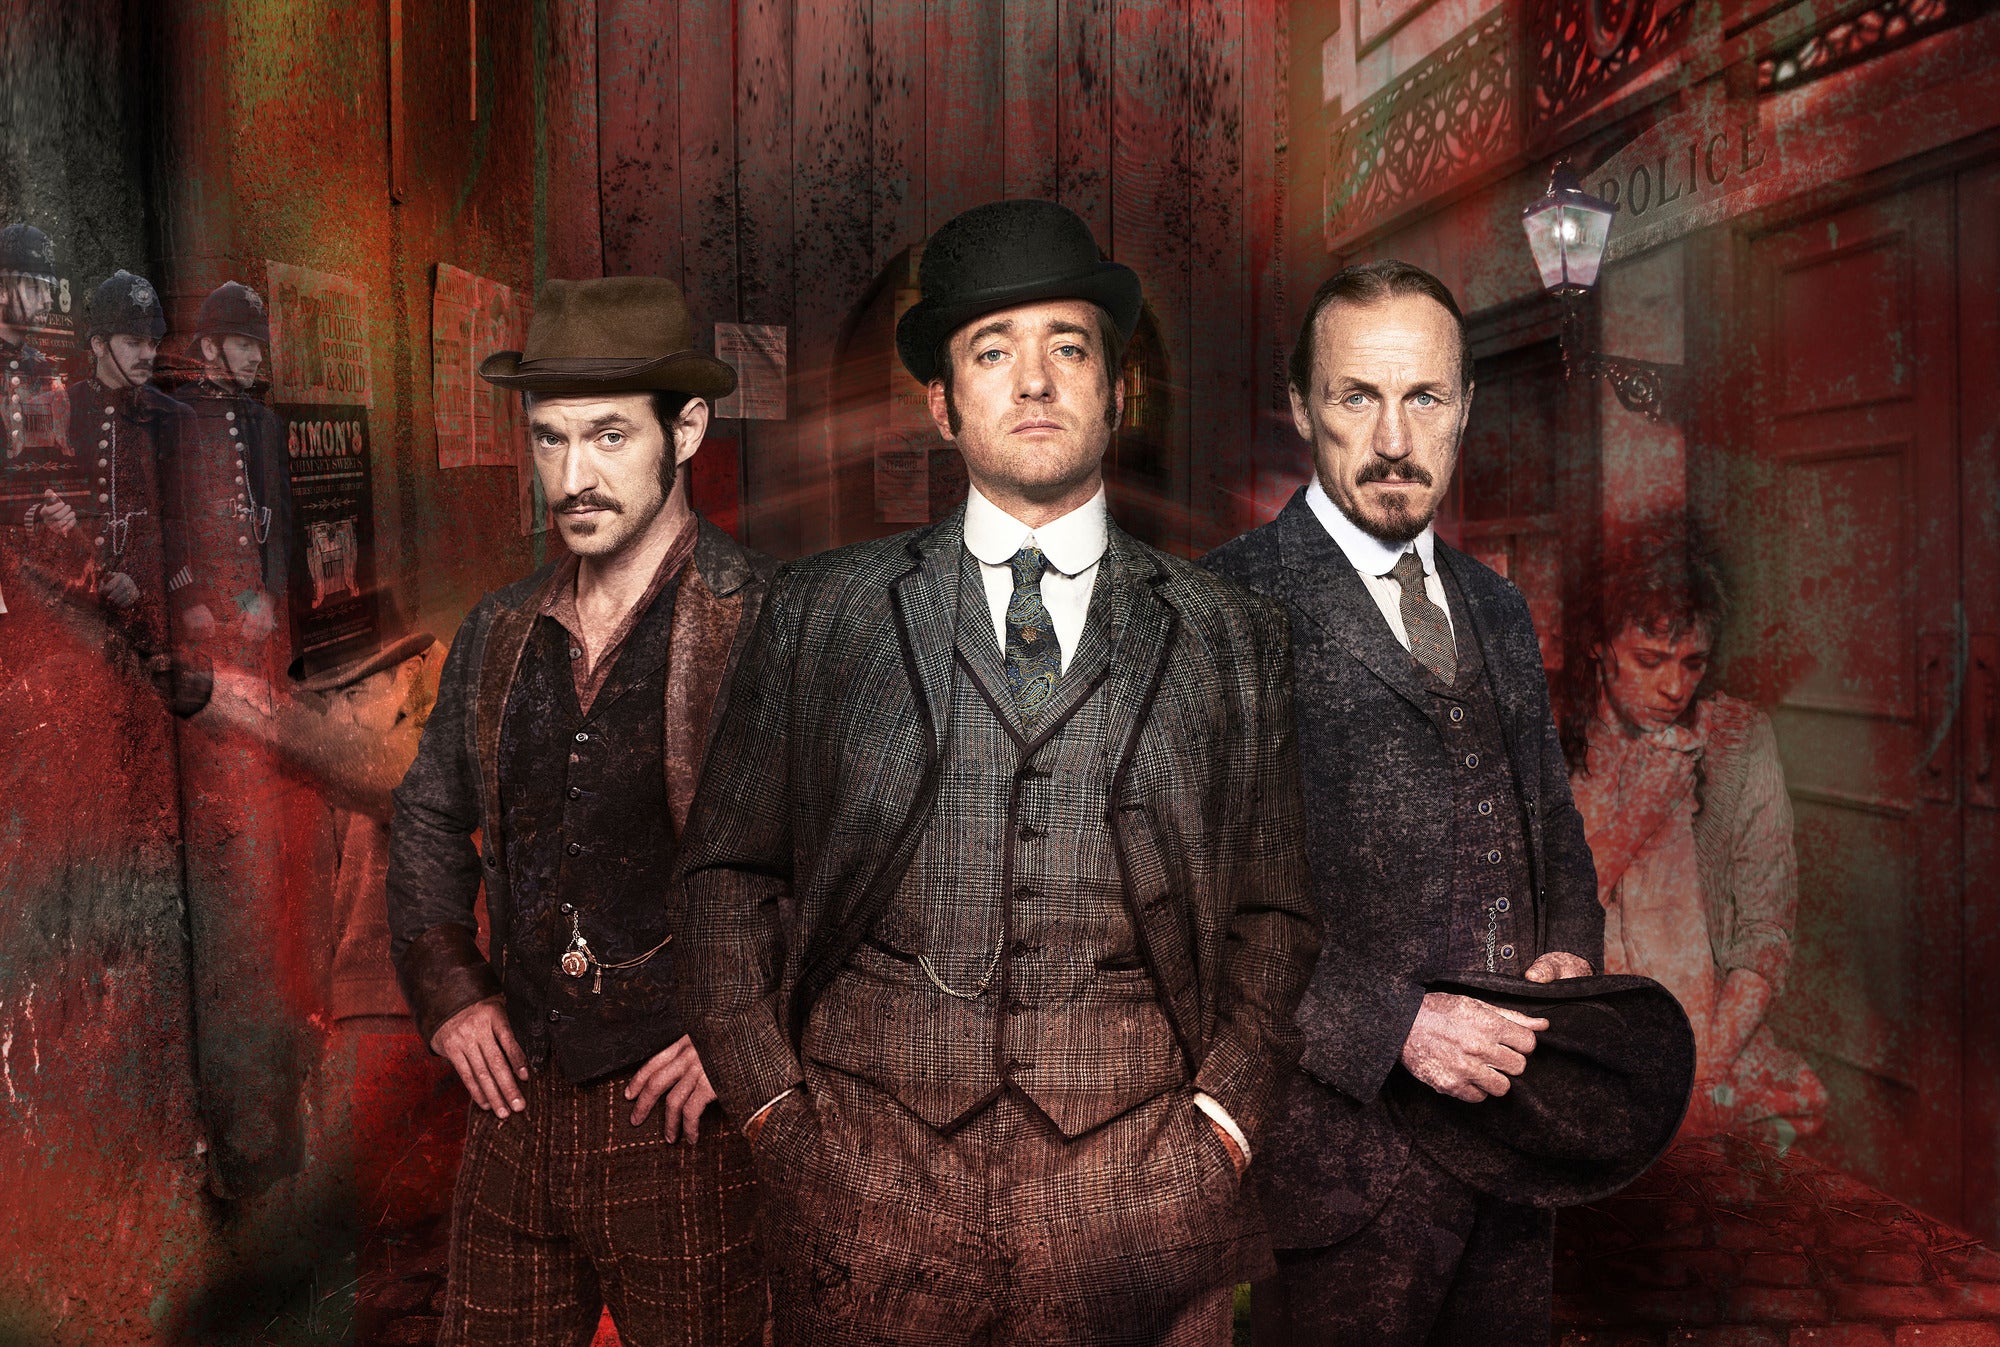 Ripper Street is to return for a third series